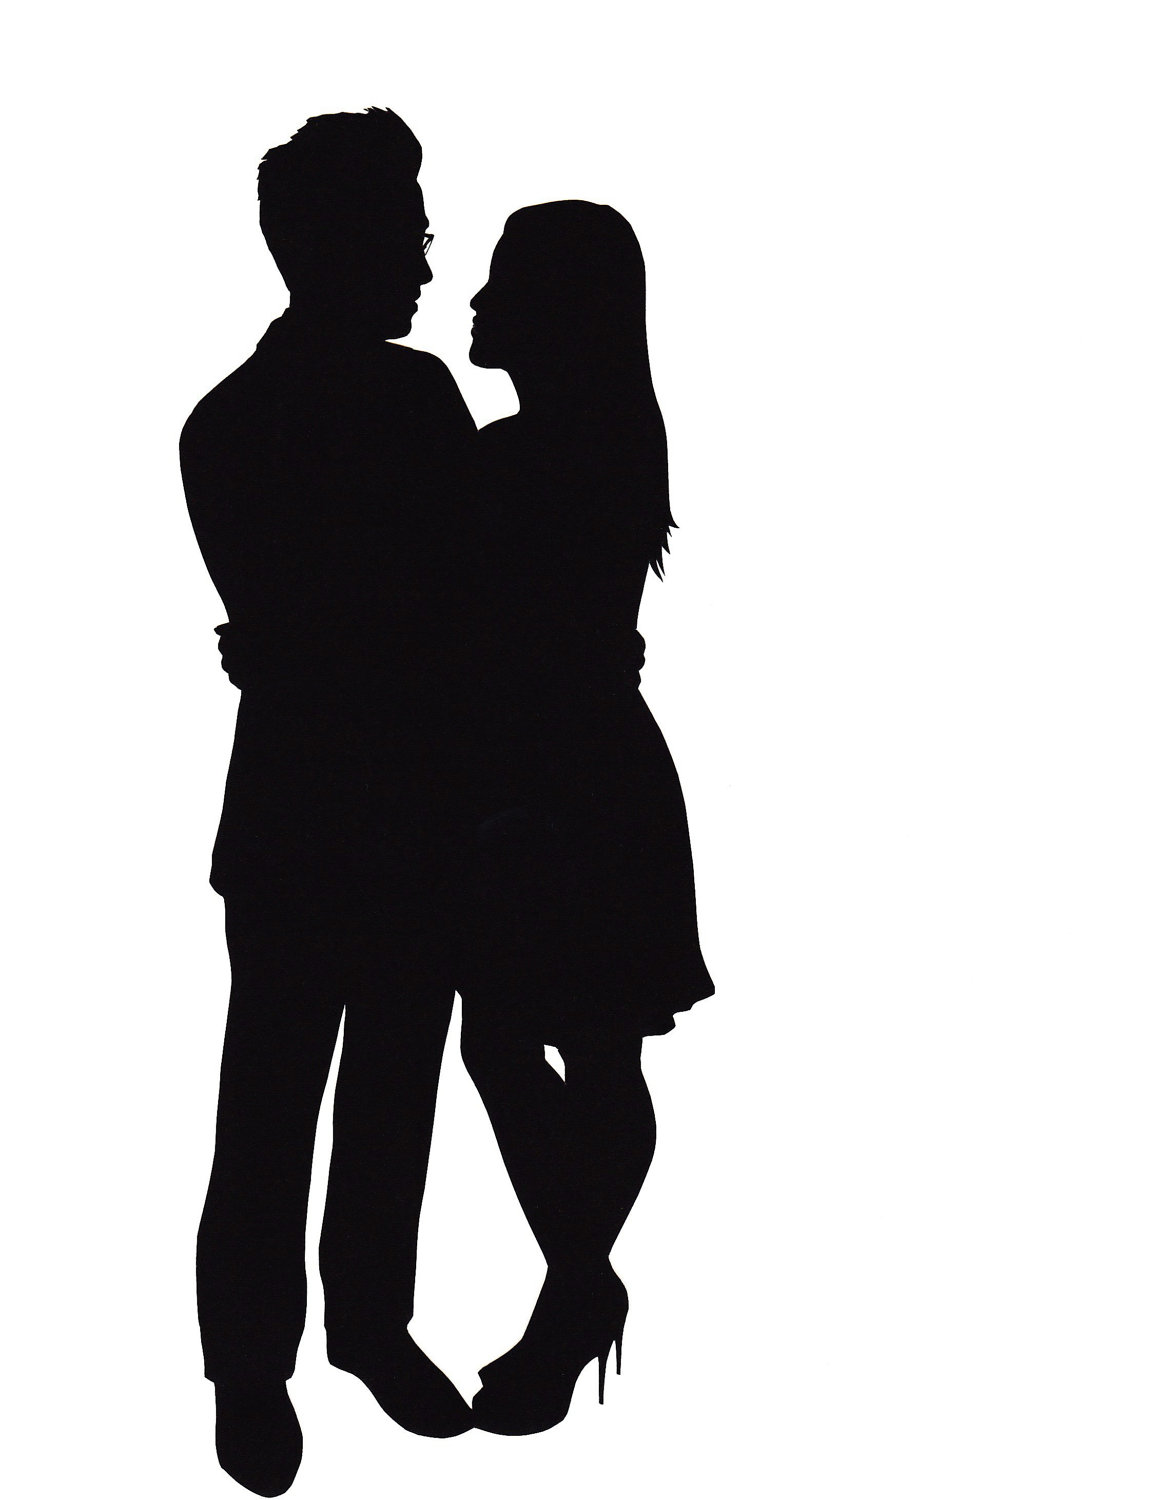 Silhouette Of Two People Kissing Free Cliparts That You Can Download